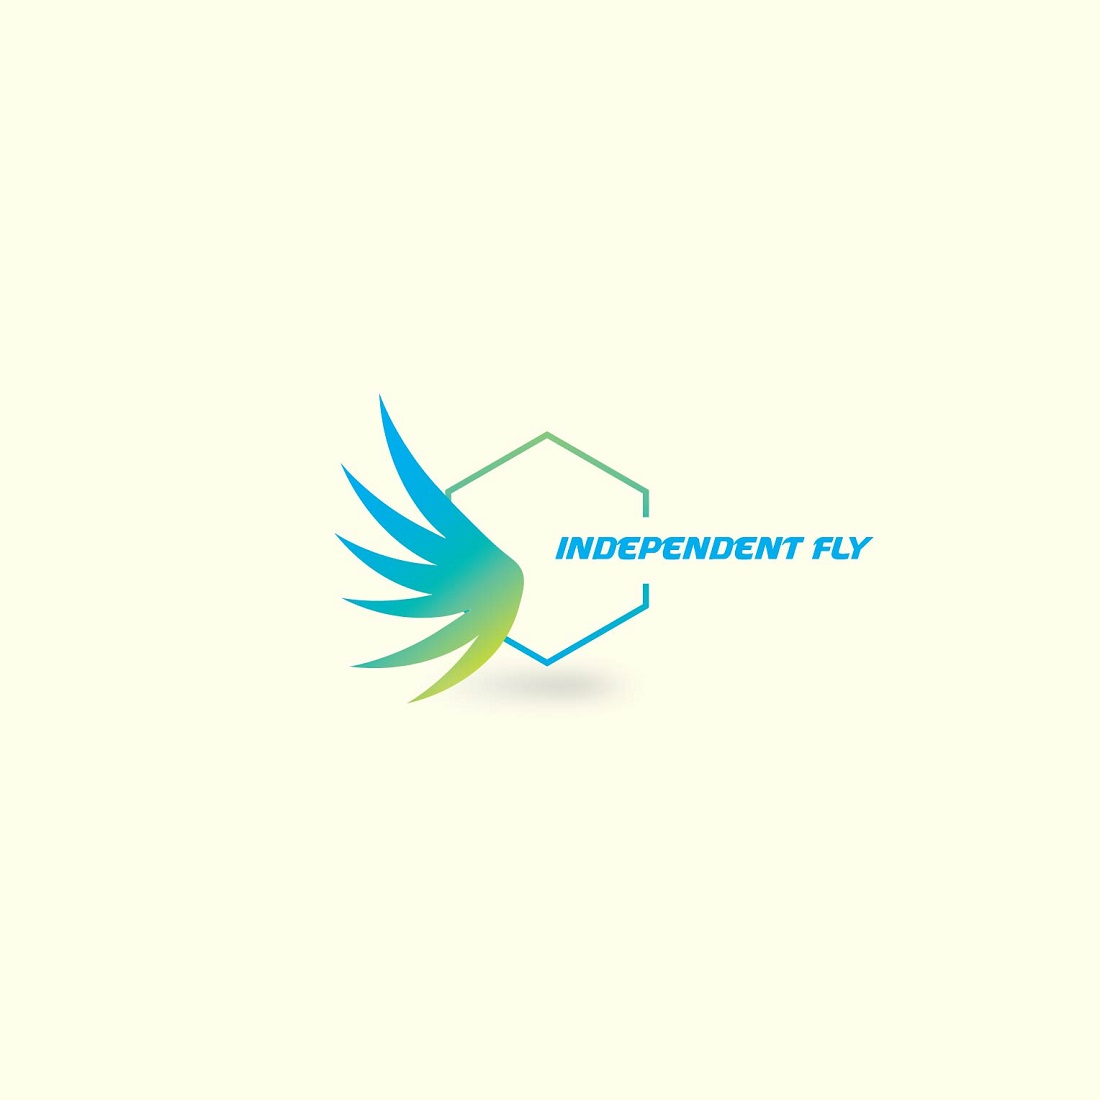 Independent fly logo template preview image.